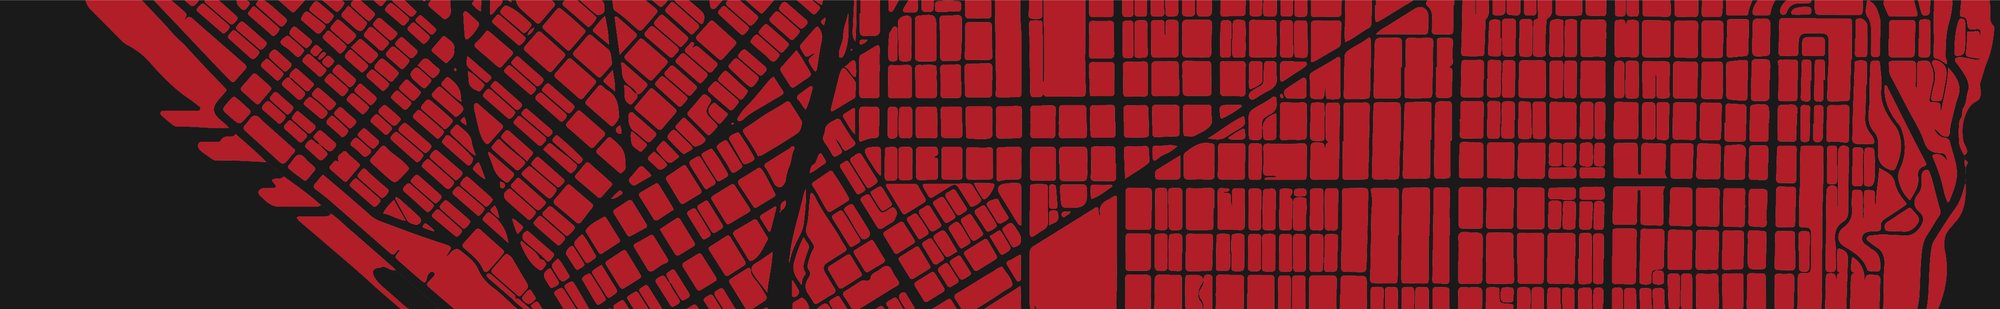 Red and Black city map outline. 